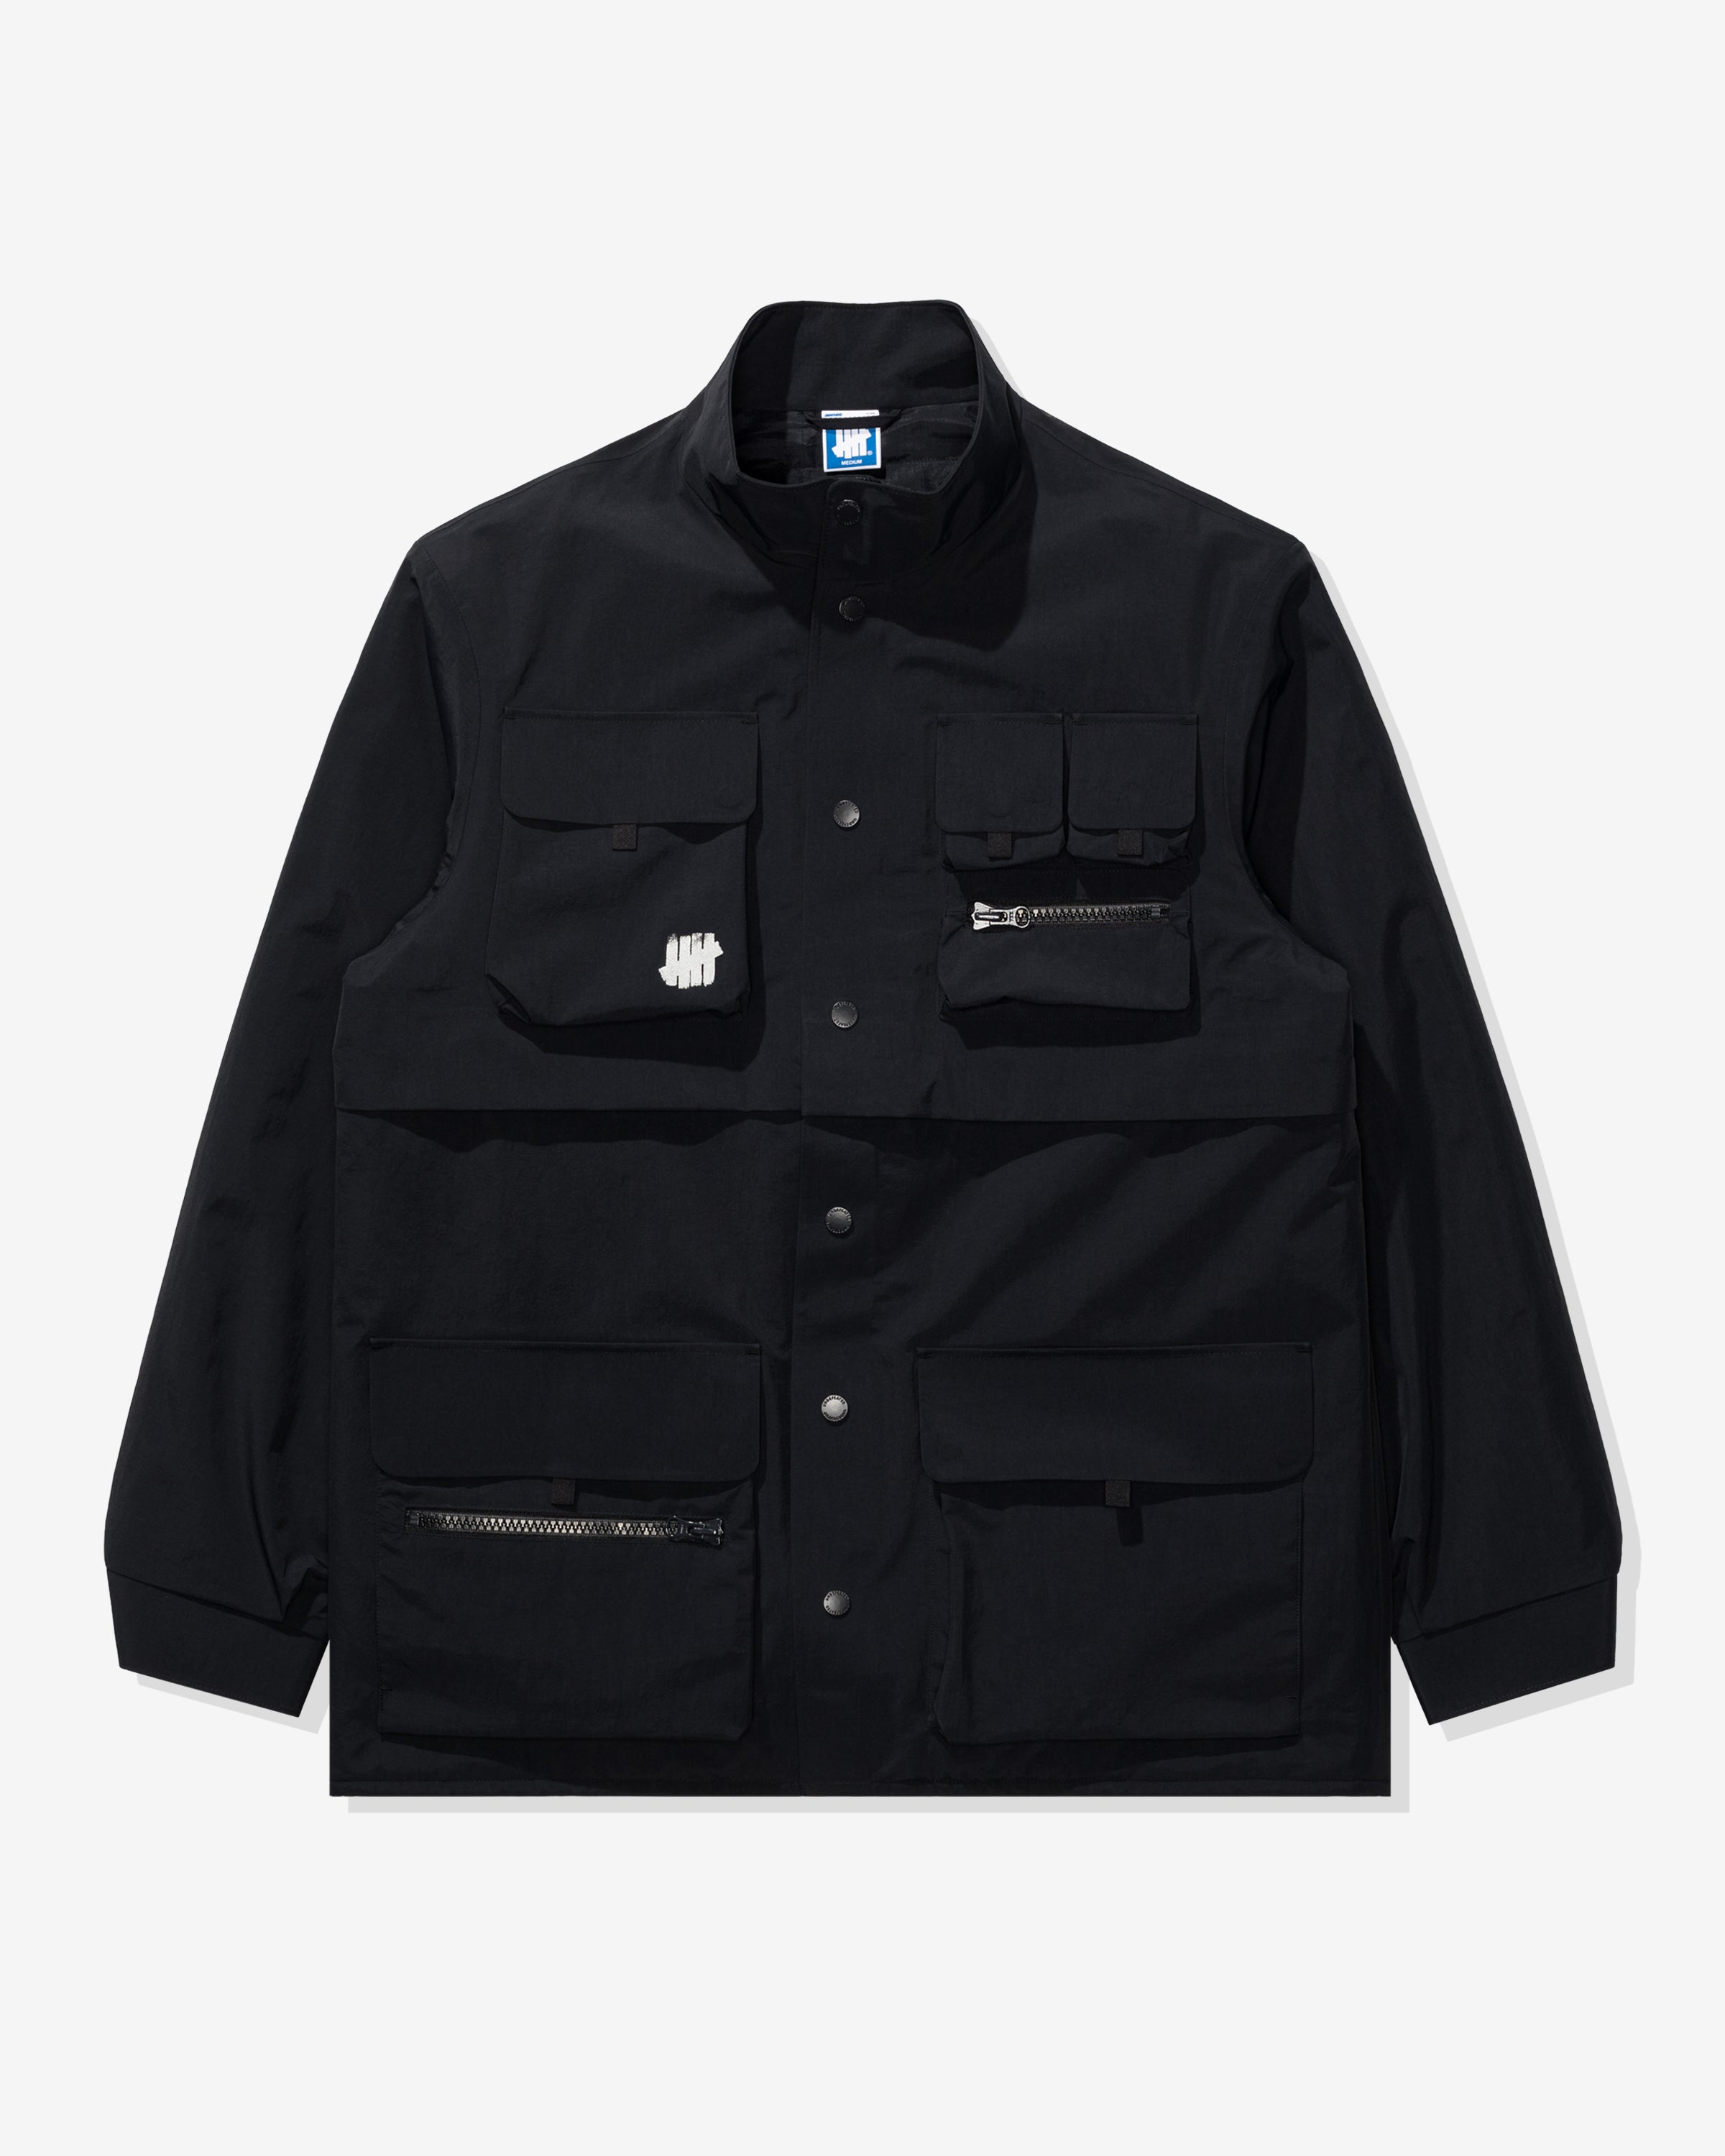 UNDEFEATED TECH M65 JACKET – Undefeated